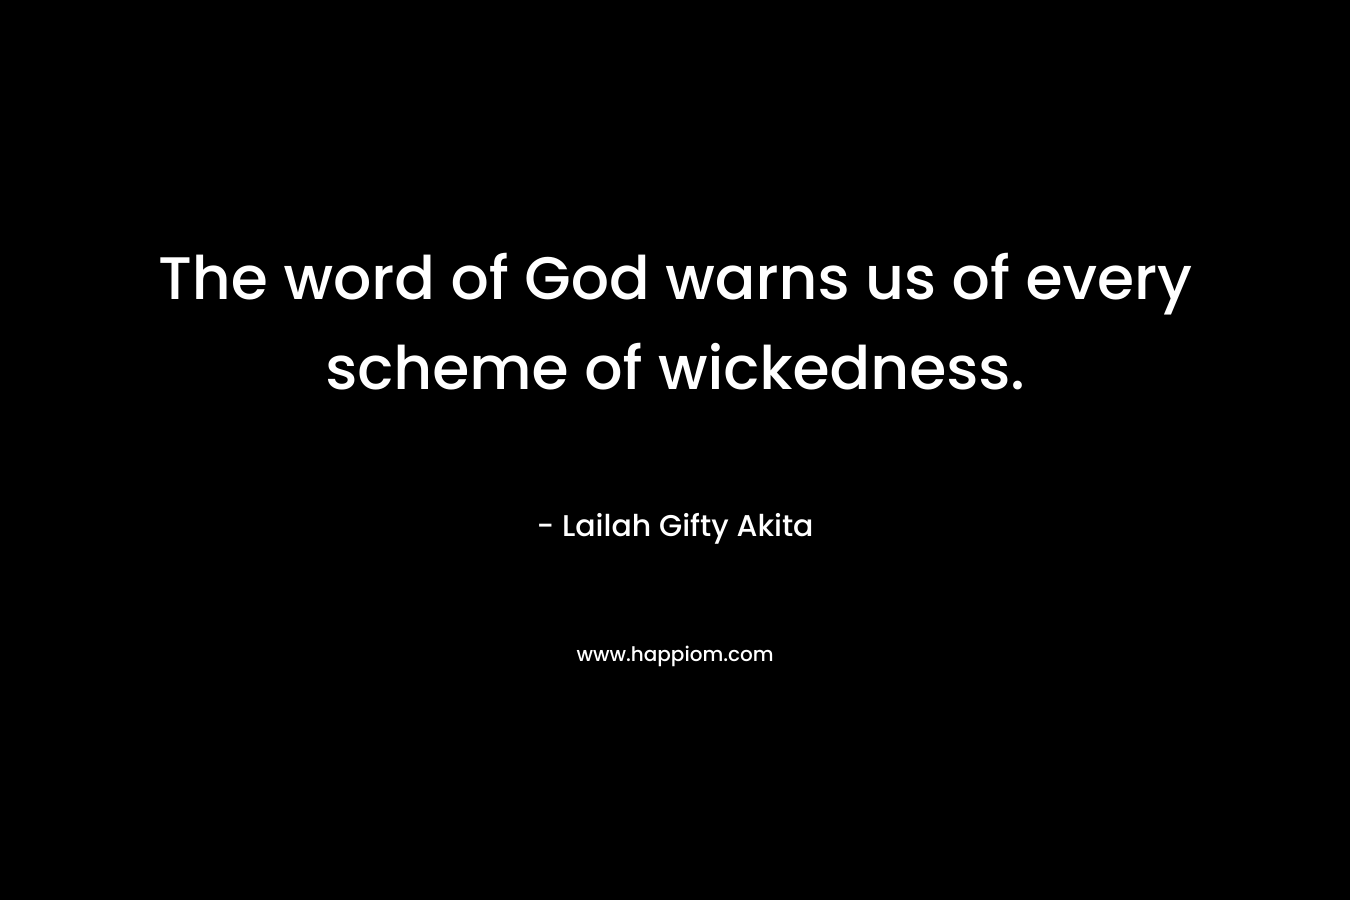 The word of God warns us of every scheme of wickedness. – Lailah Gifty Akita